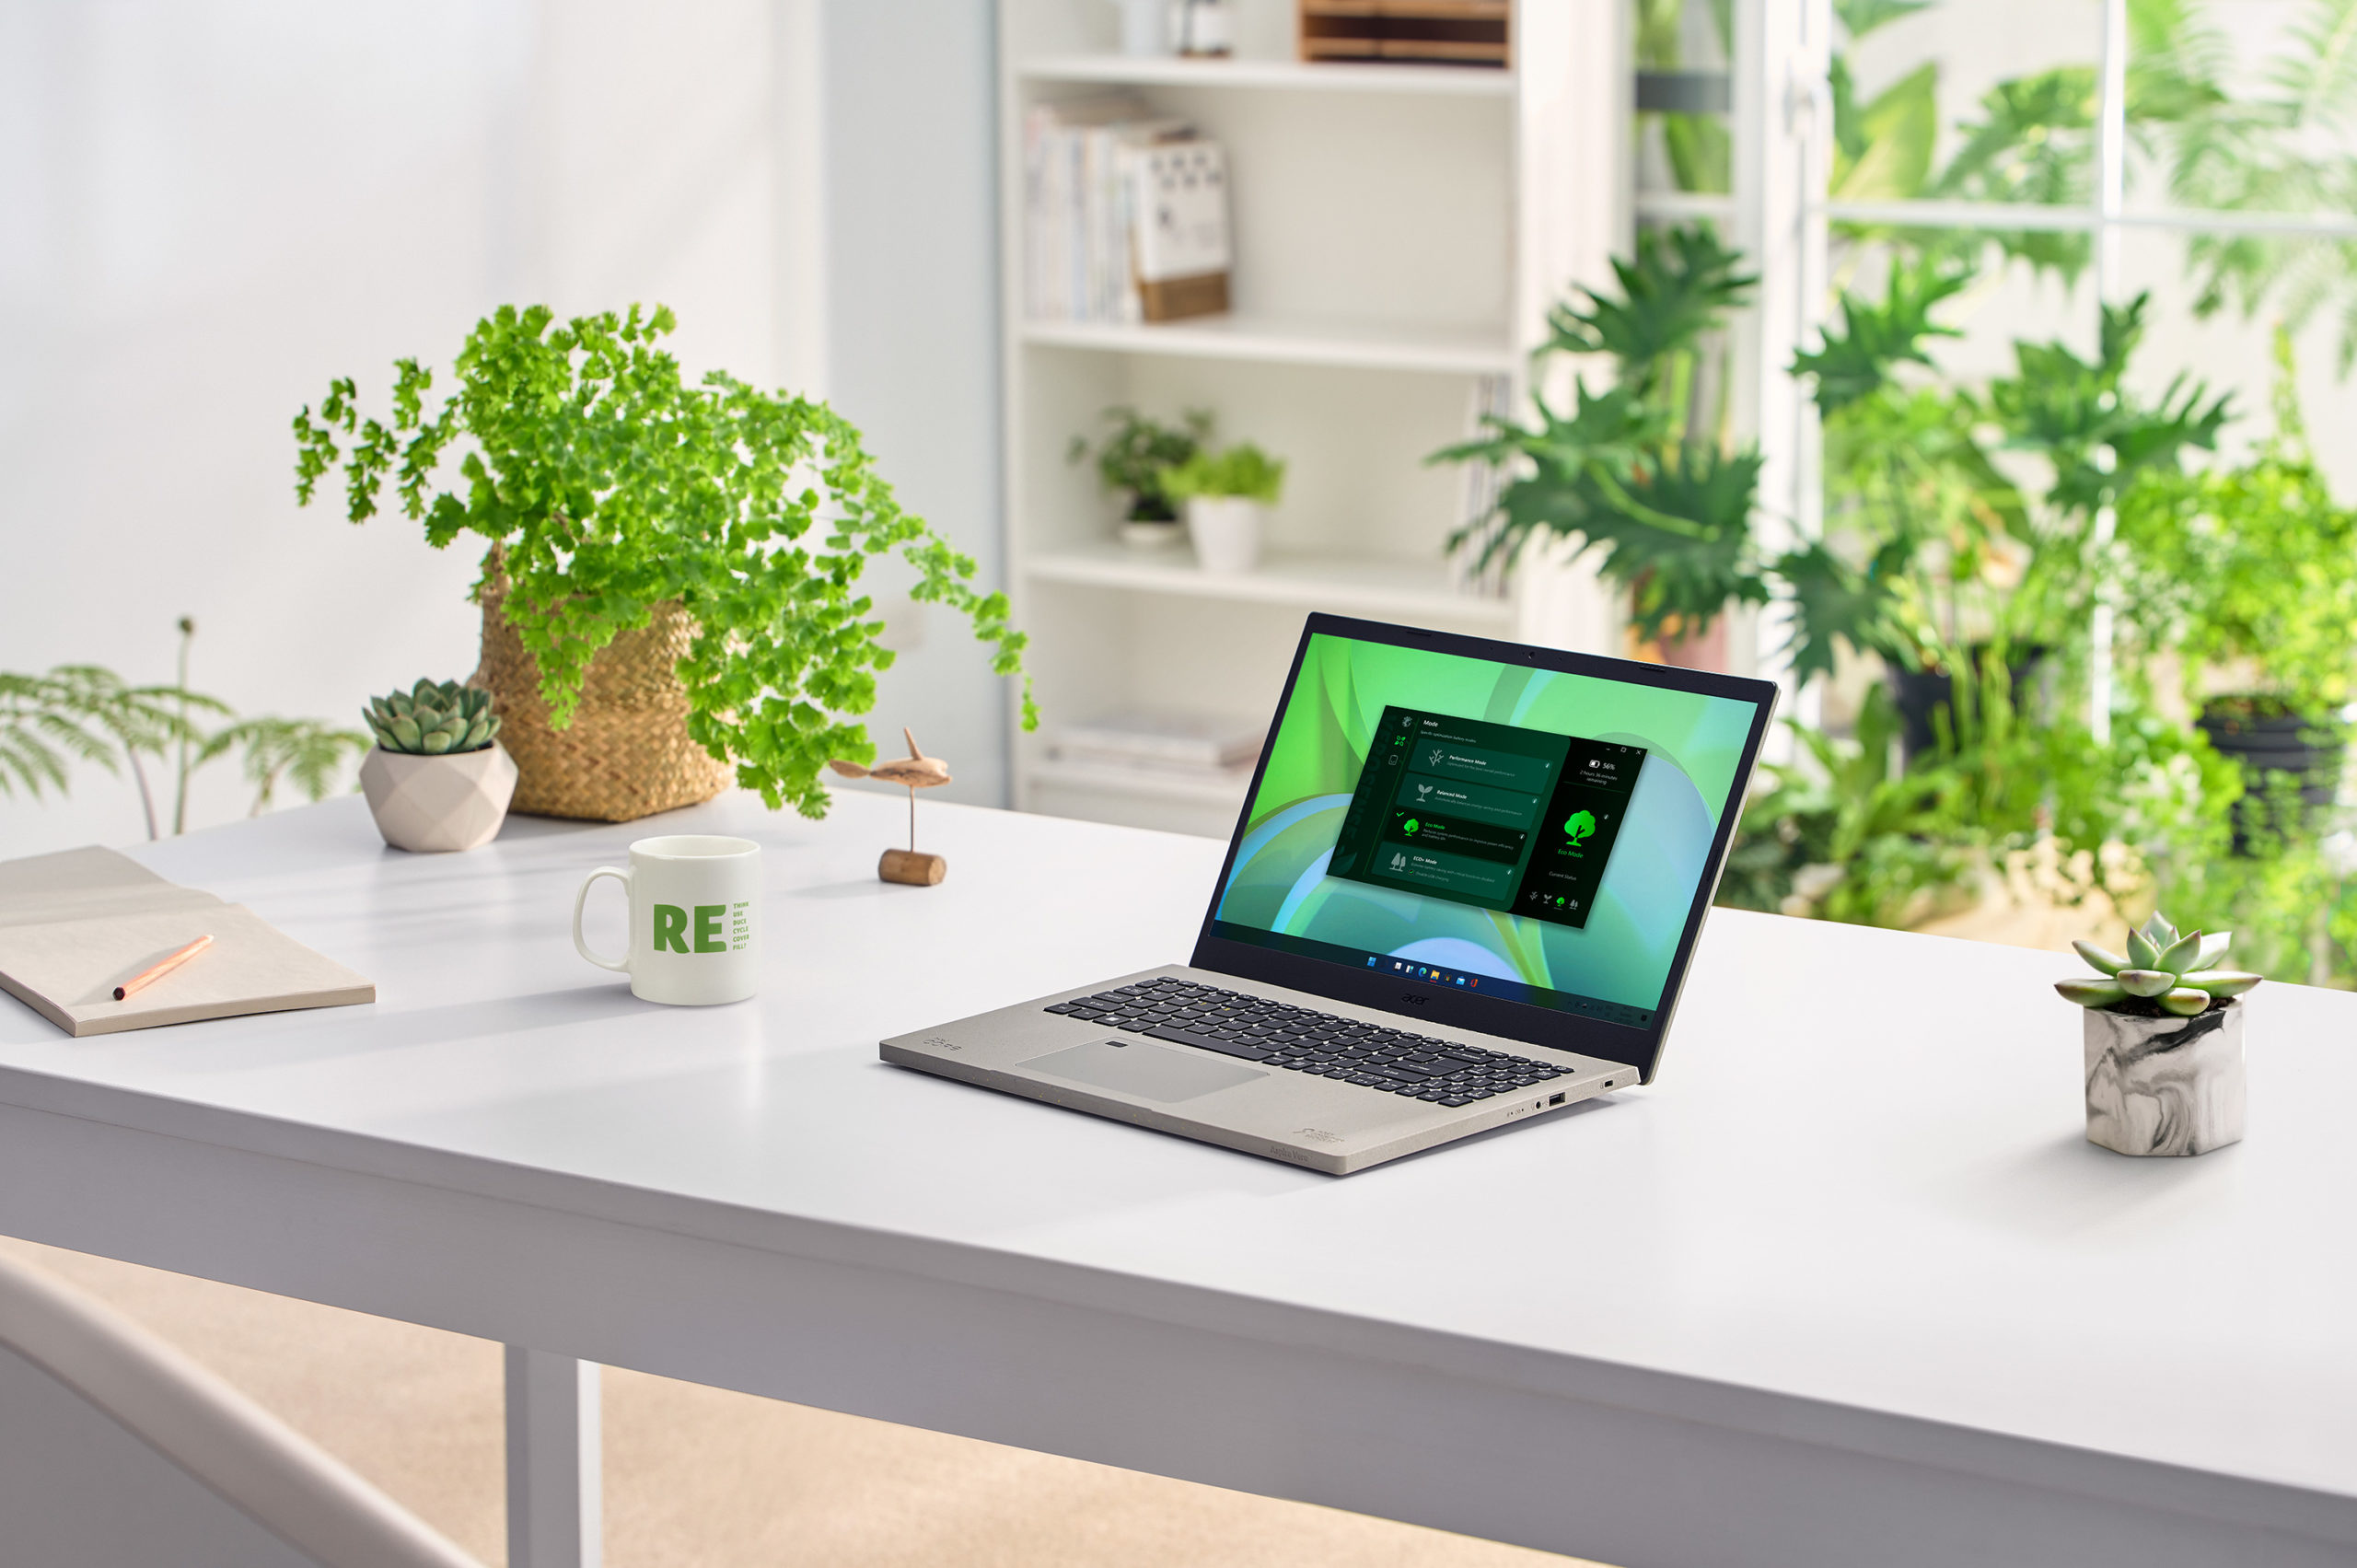 Acer Brings Its Flagship Sustainable Laptop Aspire Vero to the GCC